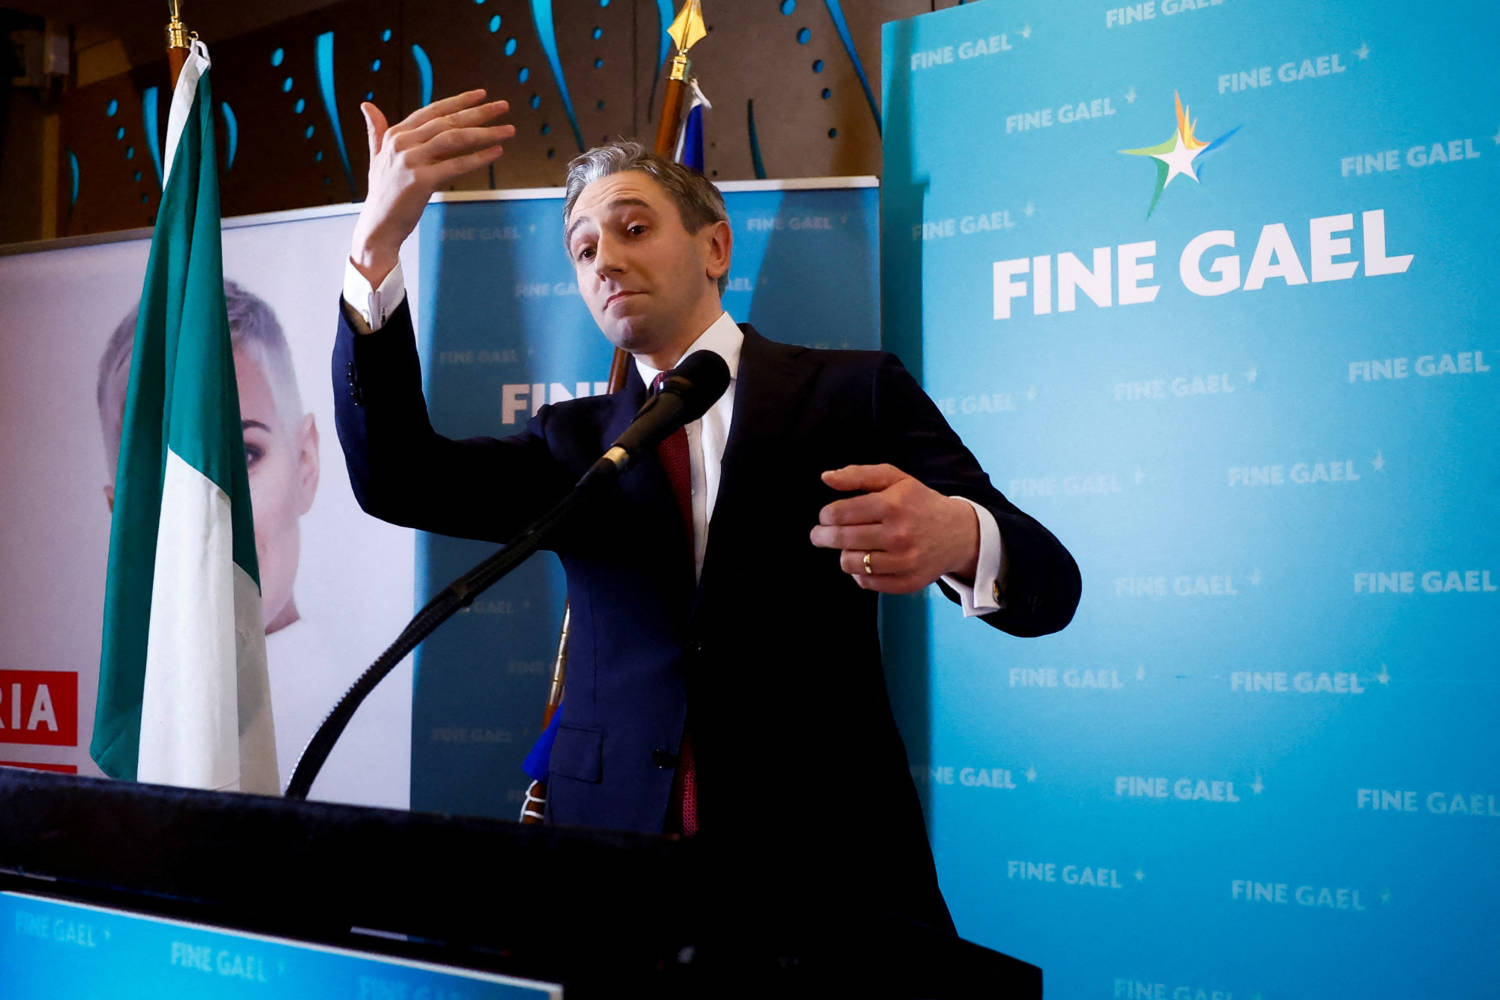 File Photo: Ireland's Minister For Higher Education Simon Harris Speaks To The Media After Being Announced As The New Leader Of Fine Gael, In Athlone